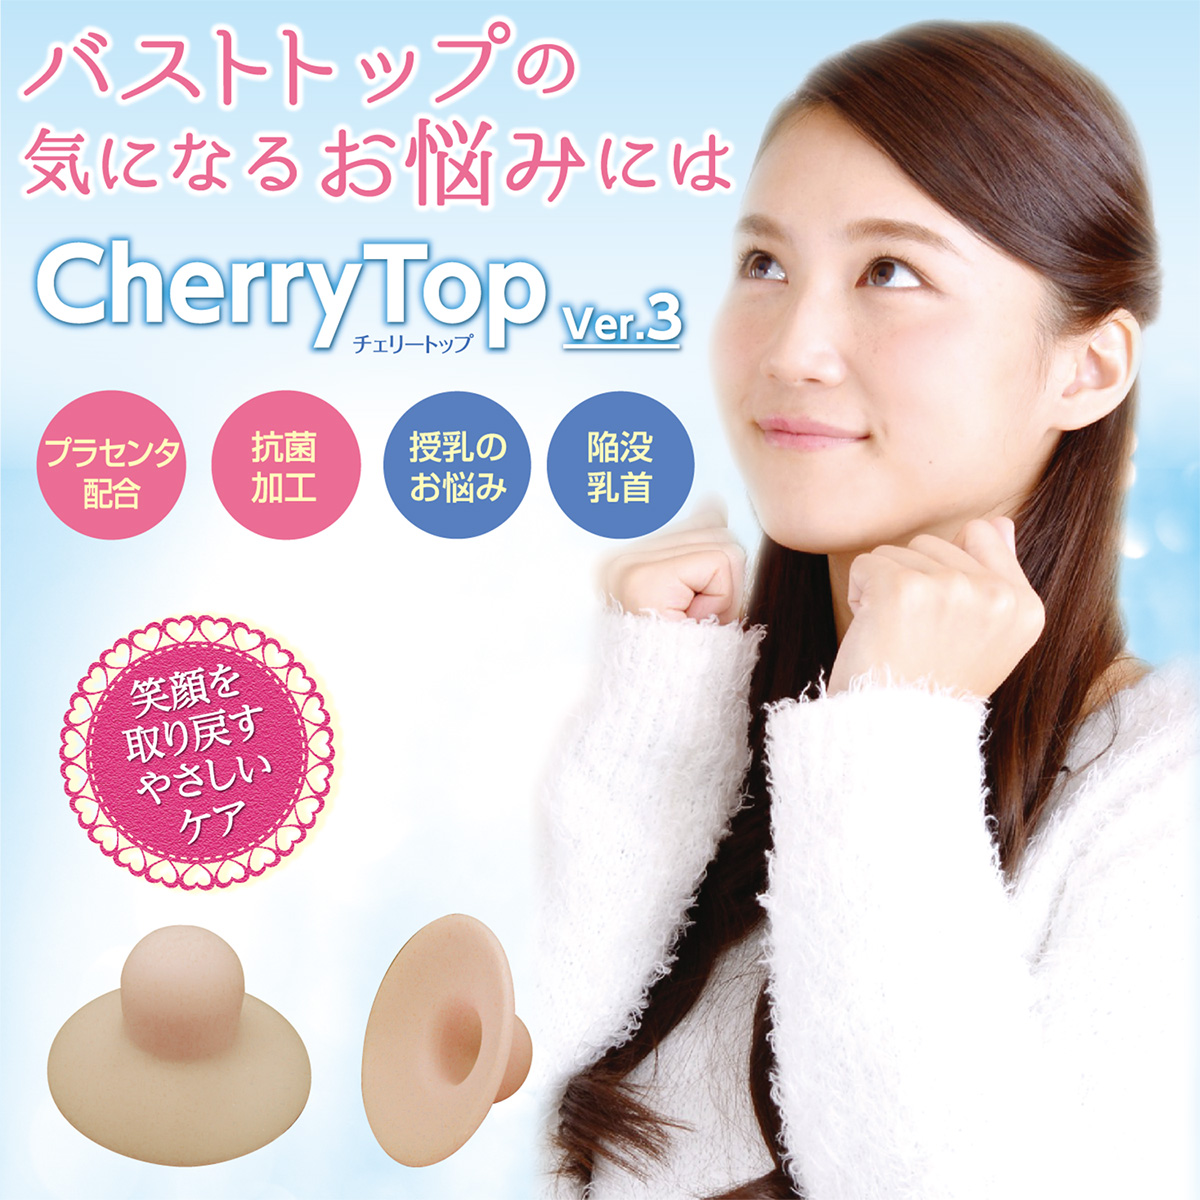  nipple aspirator Cherry top 3(2 piece insertion )- bust top .. nipple . head absorption nursing anti-bacterial processing bust care placenta soft material washing with water possible Chery Top III